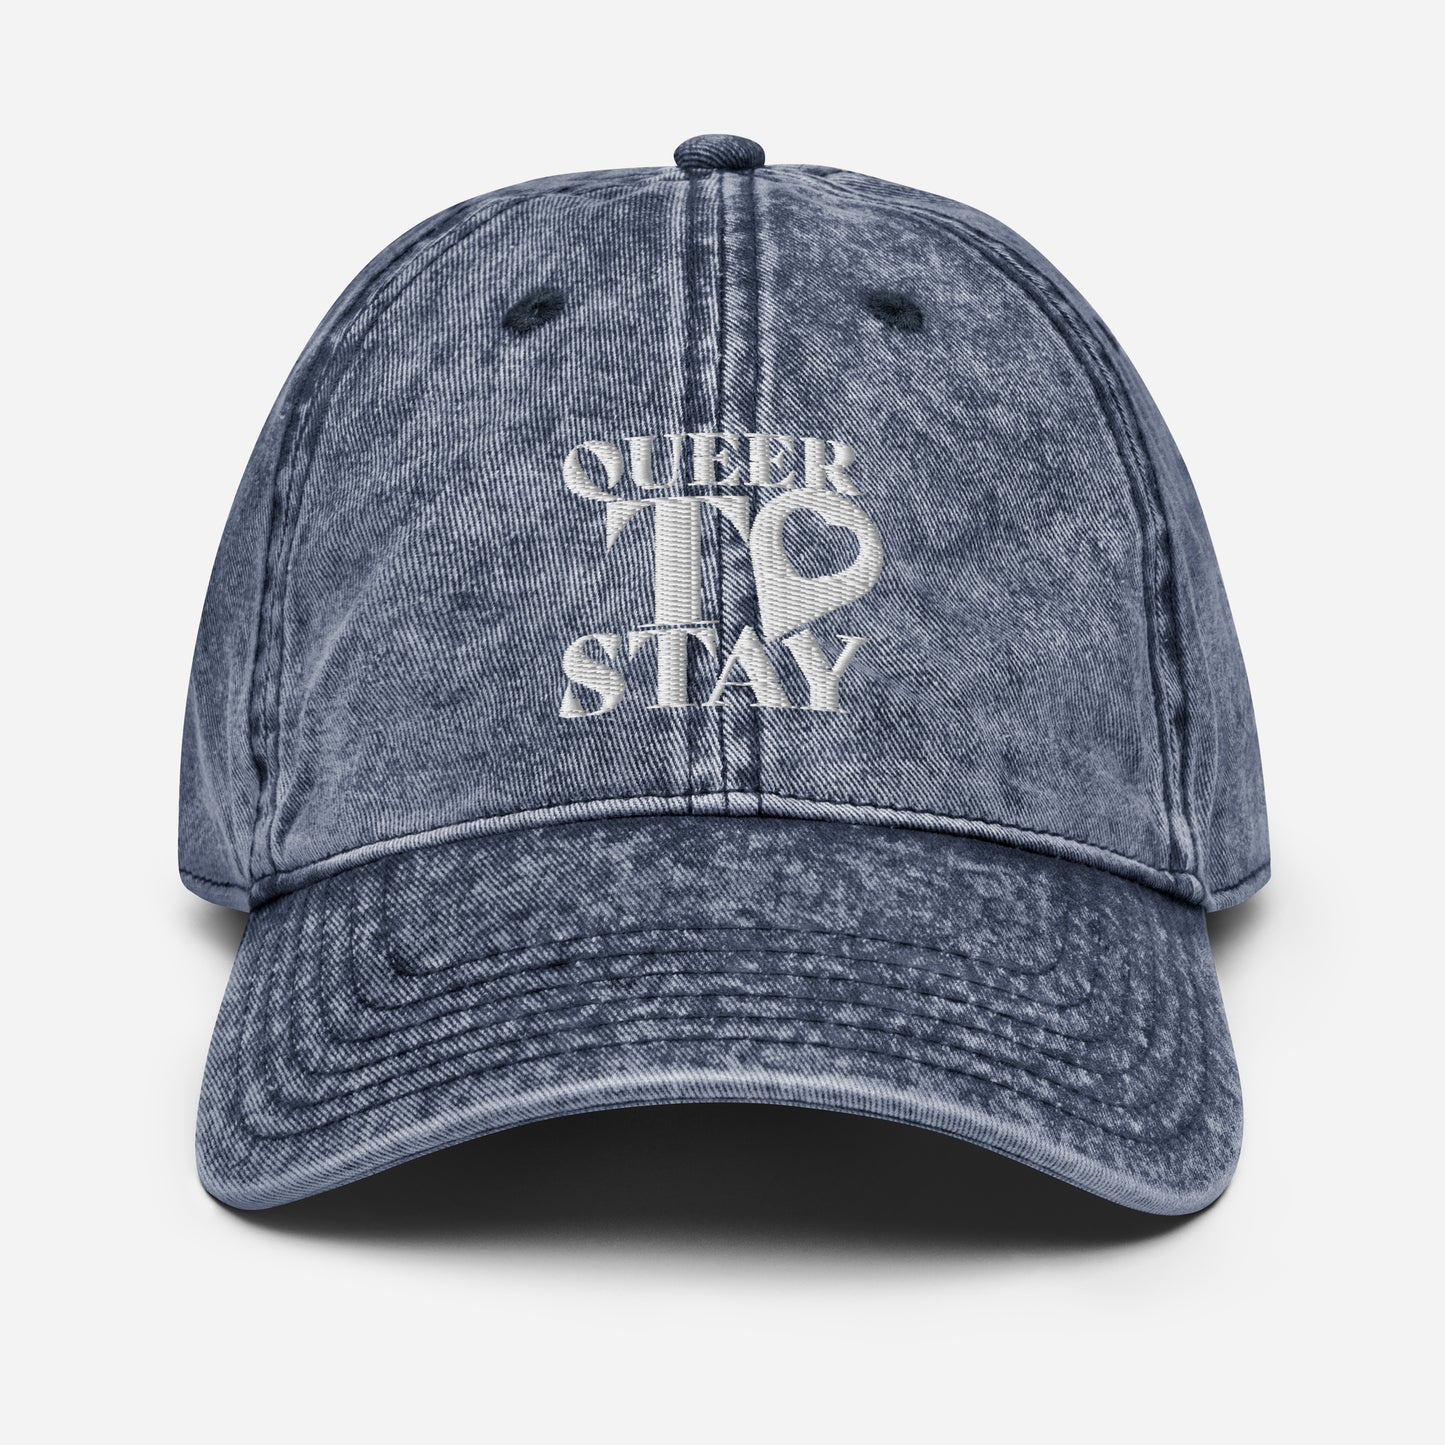 Showtime Queer To Stay Logo Vintage Cap